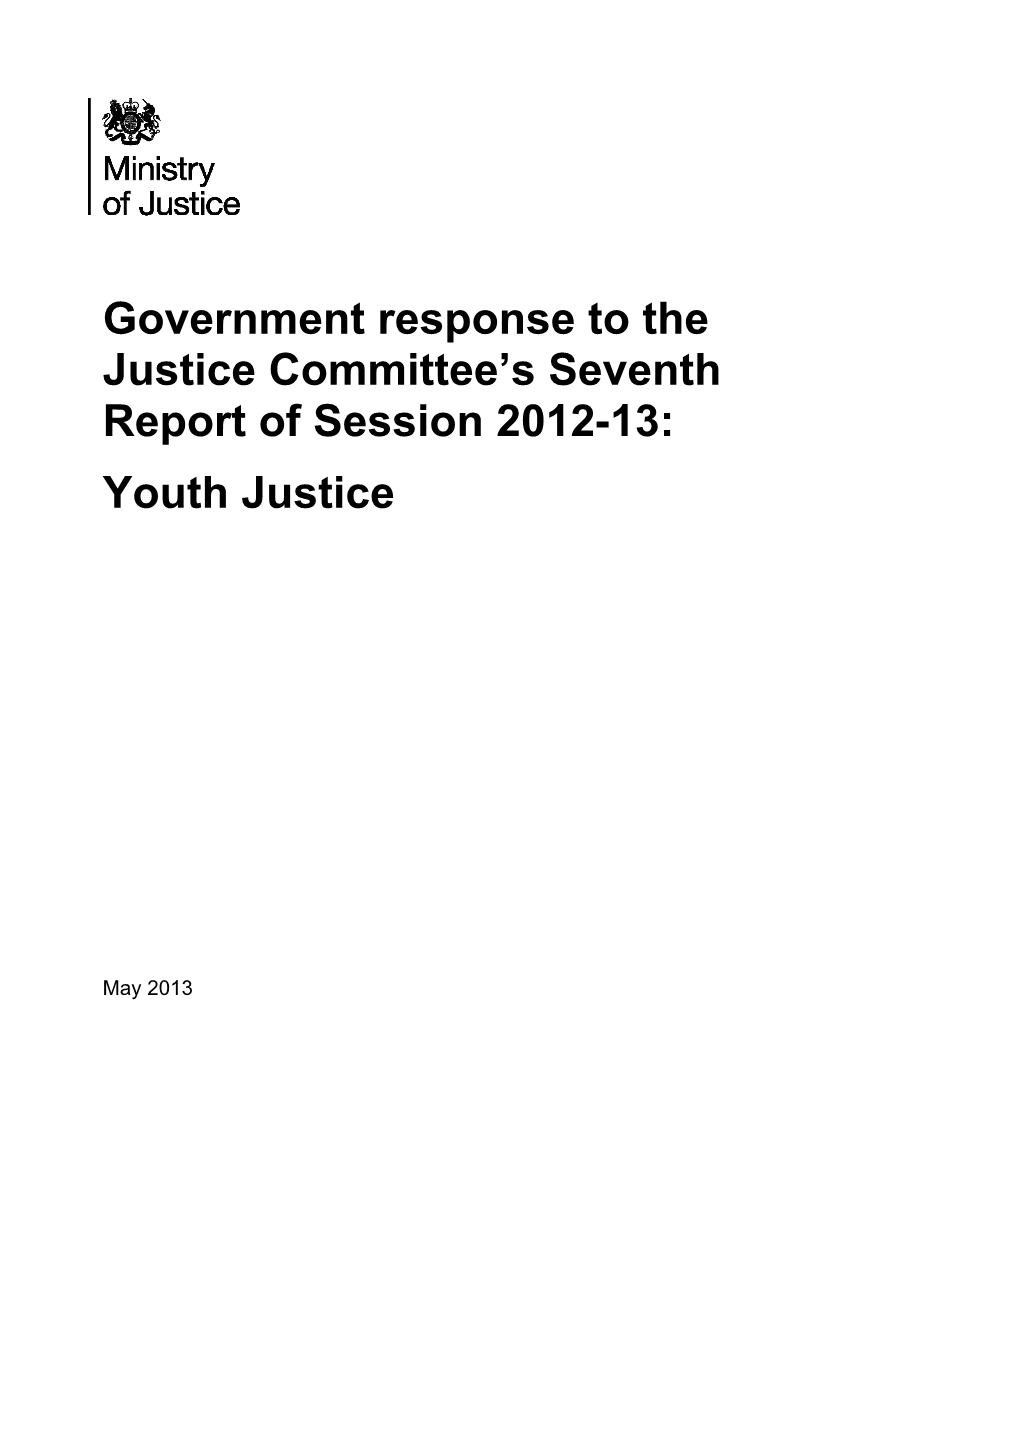 Government Response to the Justice Committee's Seventh Report Of